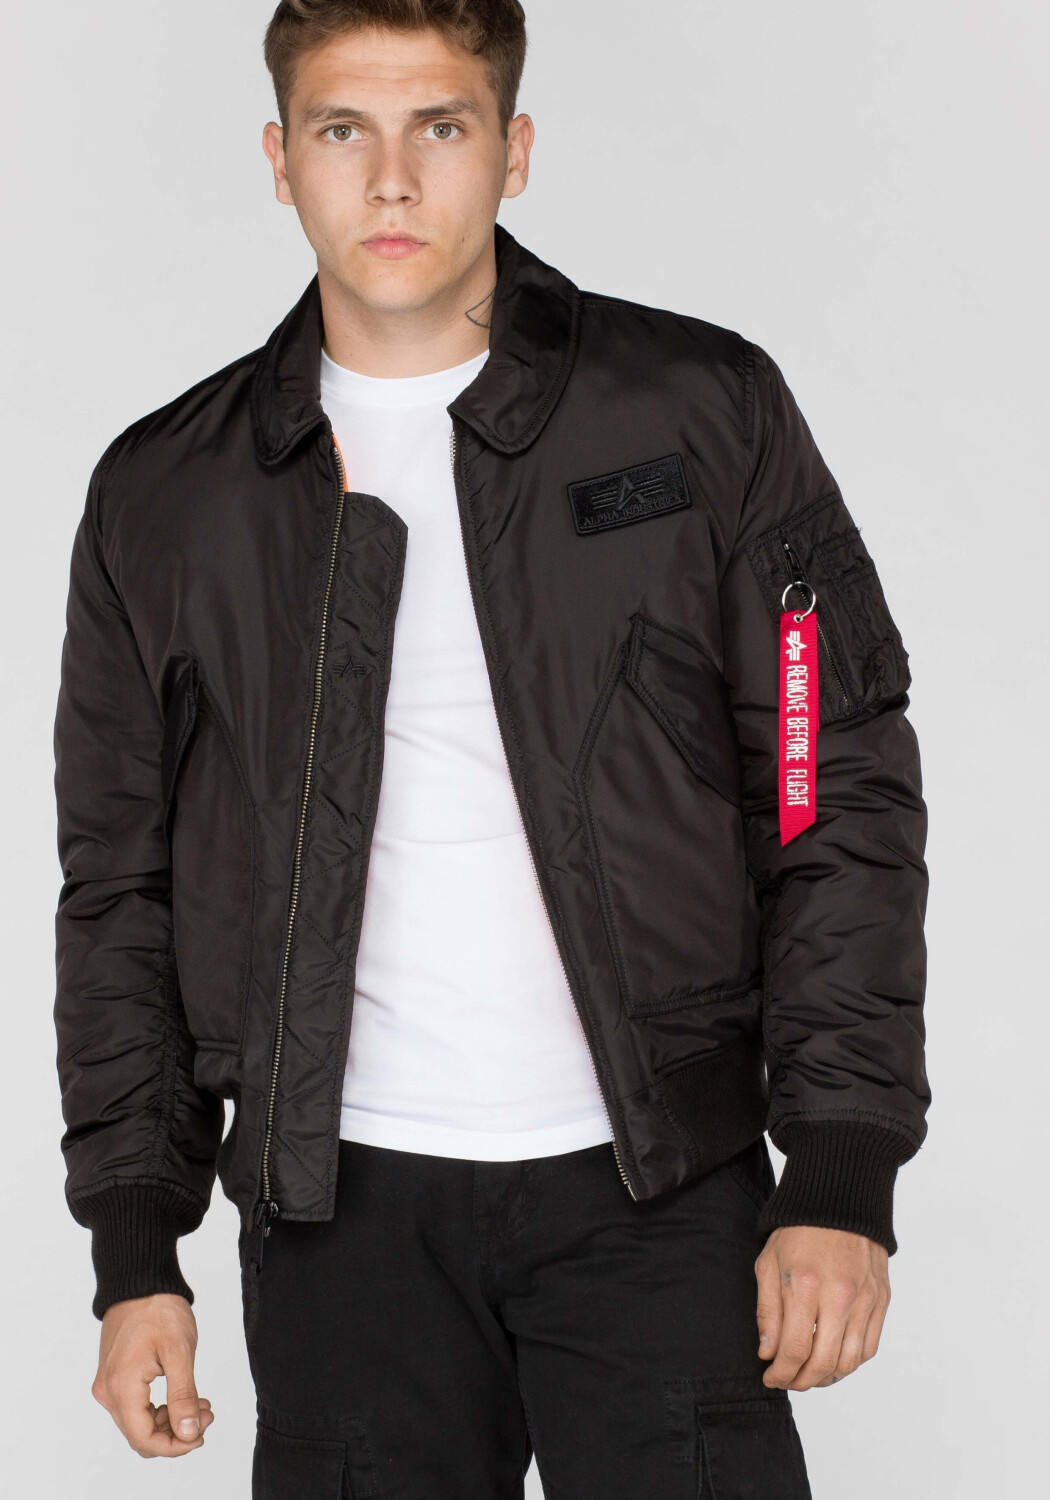 Buy Alpha Industries CWU 45 black from £124.99 (Today) – Best Deals on ...